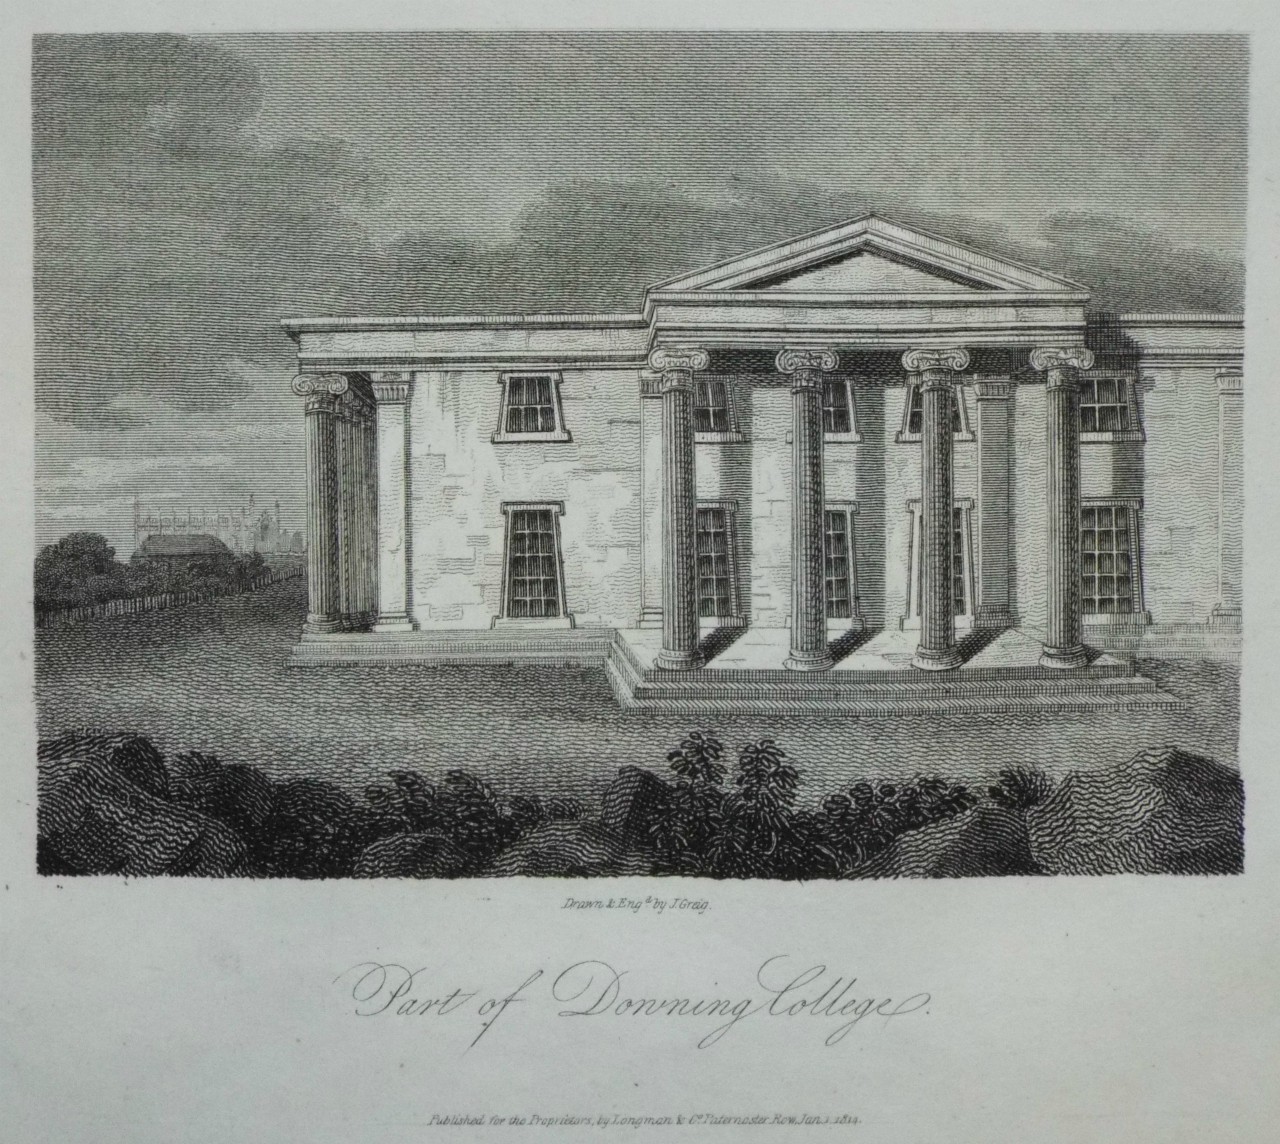 Print - Part of Downing College. - Greig